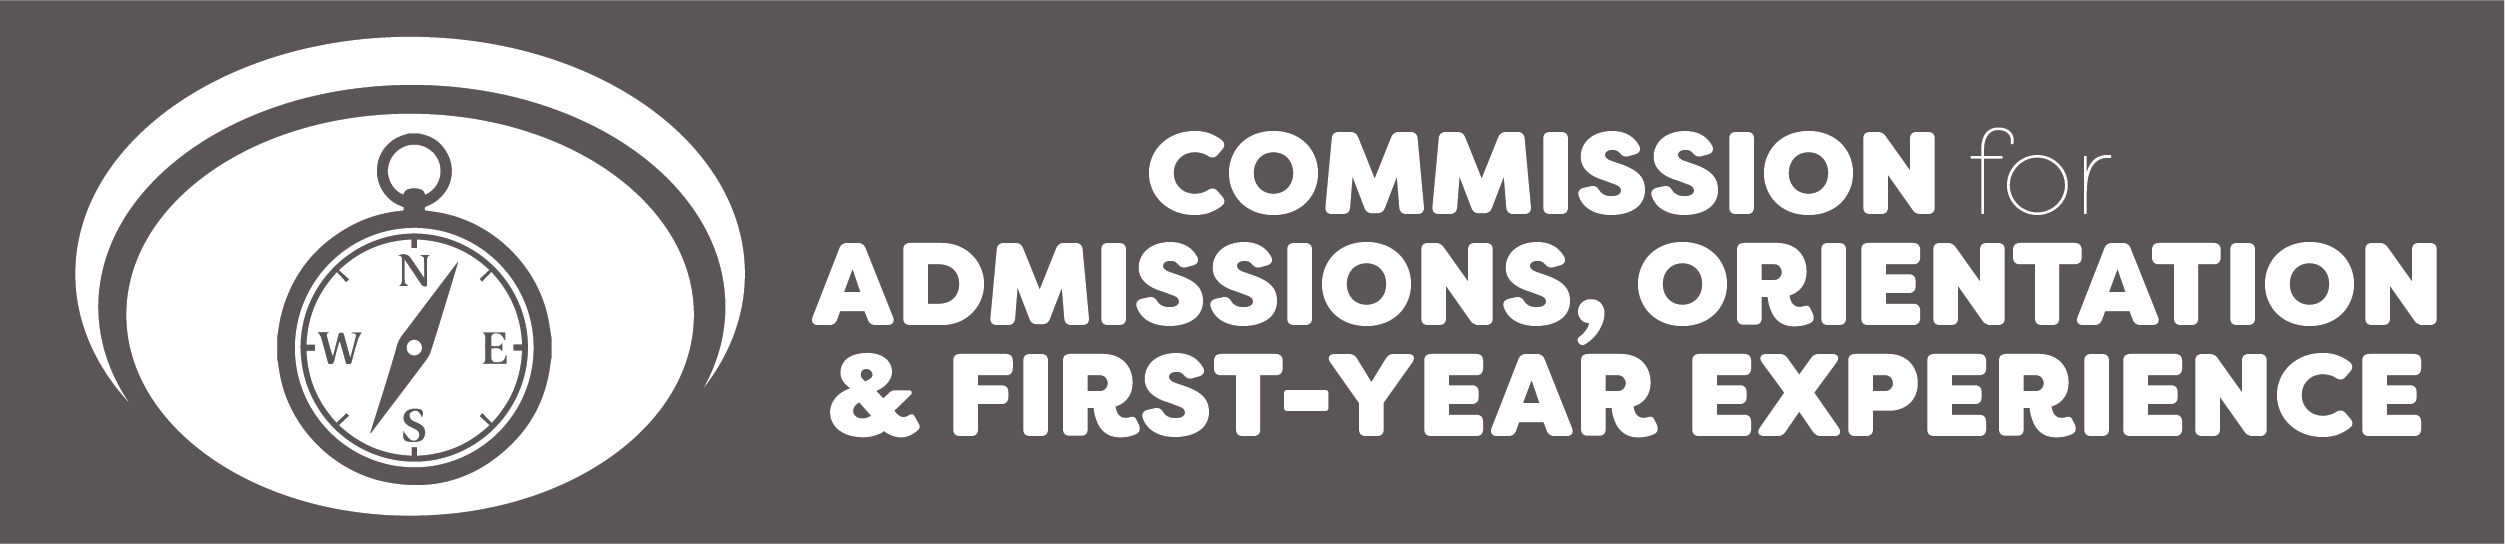 Commission for Admission, Orientation & First-Year Experience logo with a compass